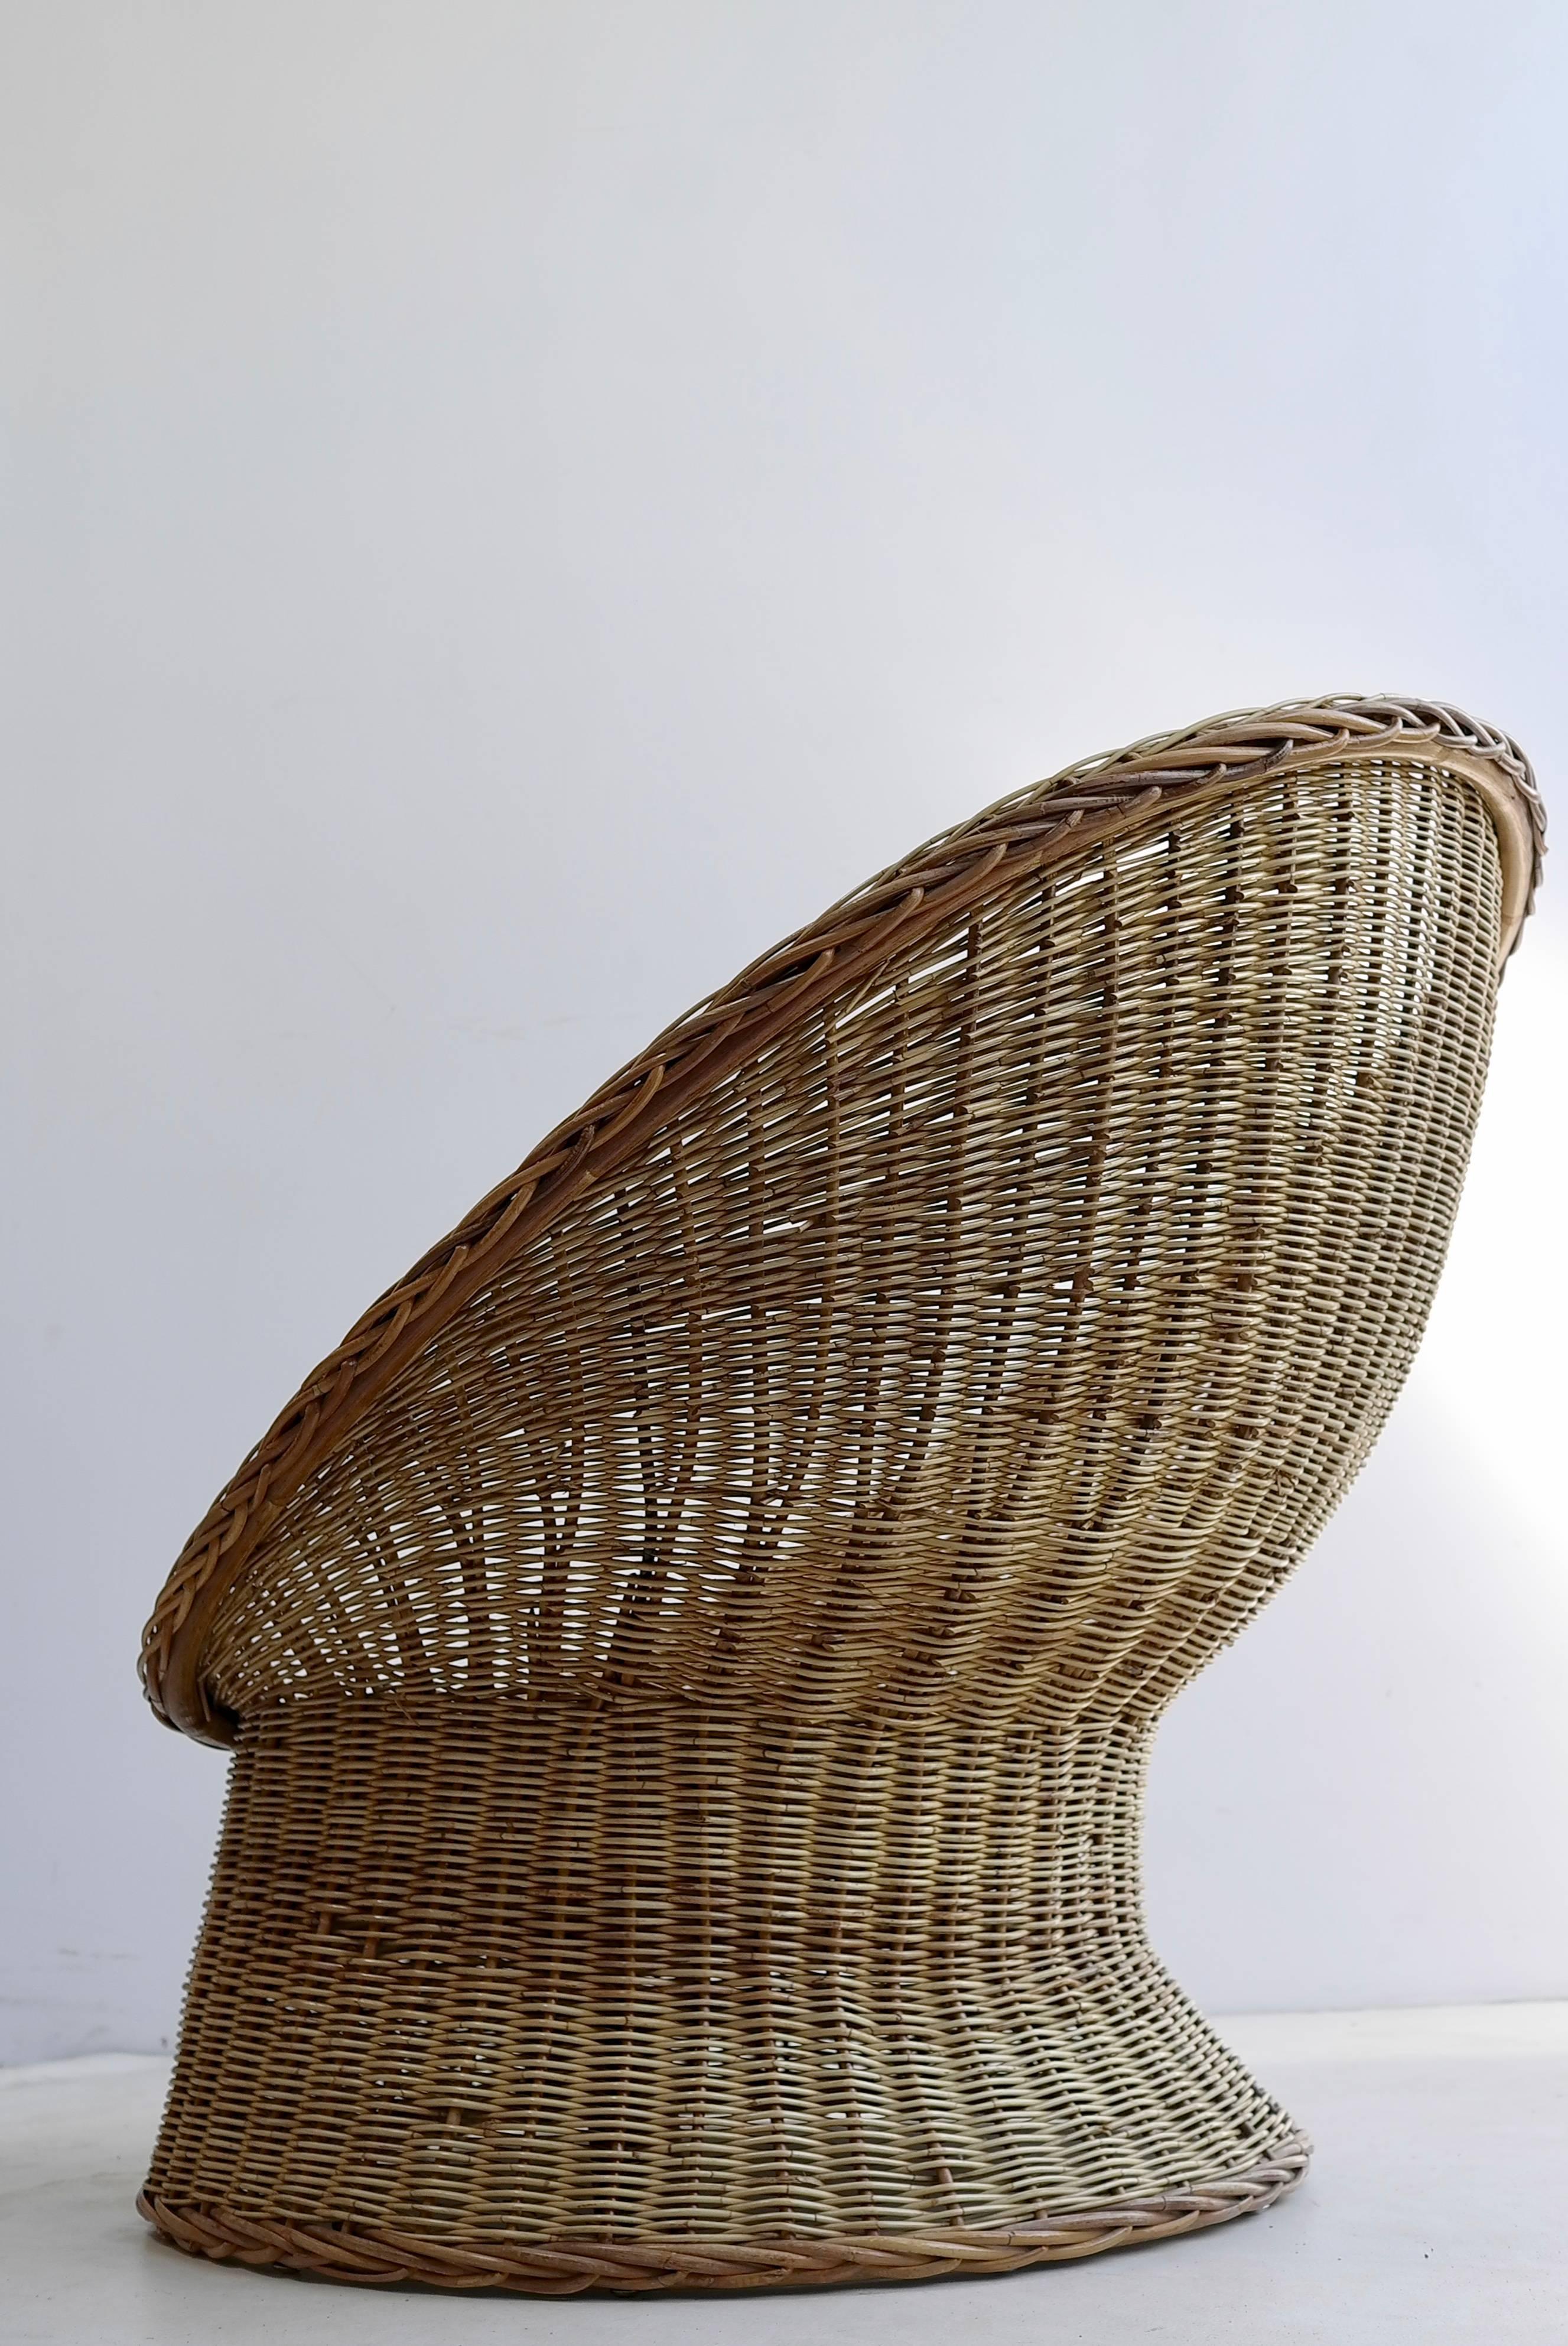 Mid-Century Modern Rare Wicker Egg Shaped Armchair by Wim Den Boon, Holland, 1952 For Sale